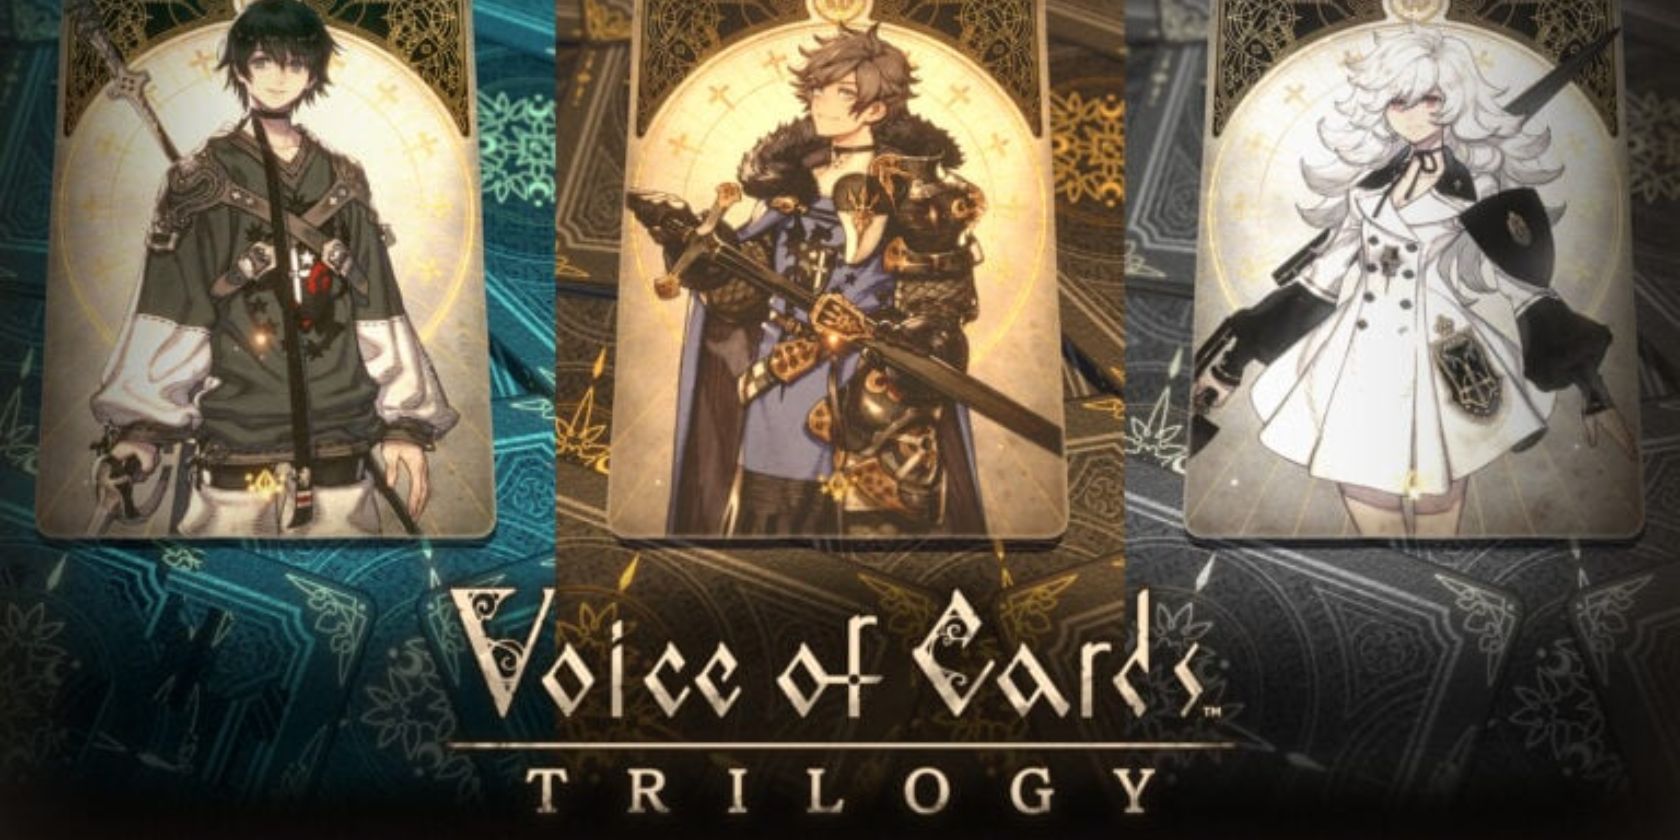 three stylized characters from the voice of cards game standing in portraits